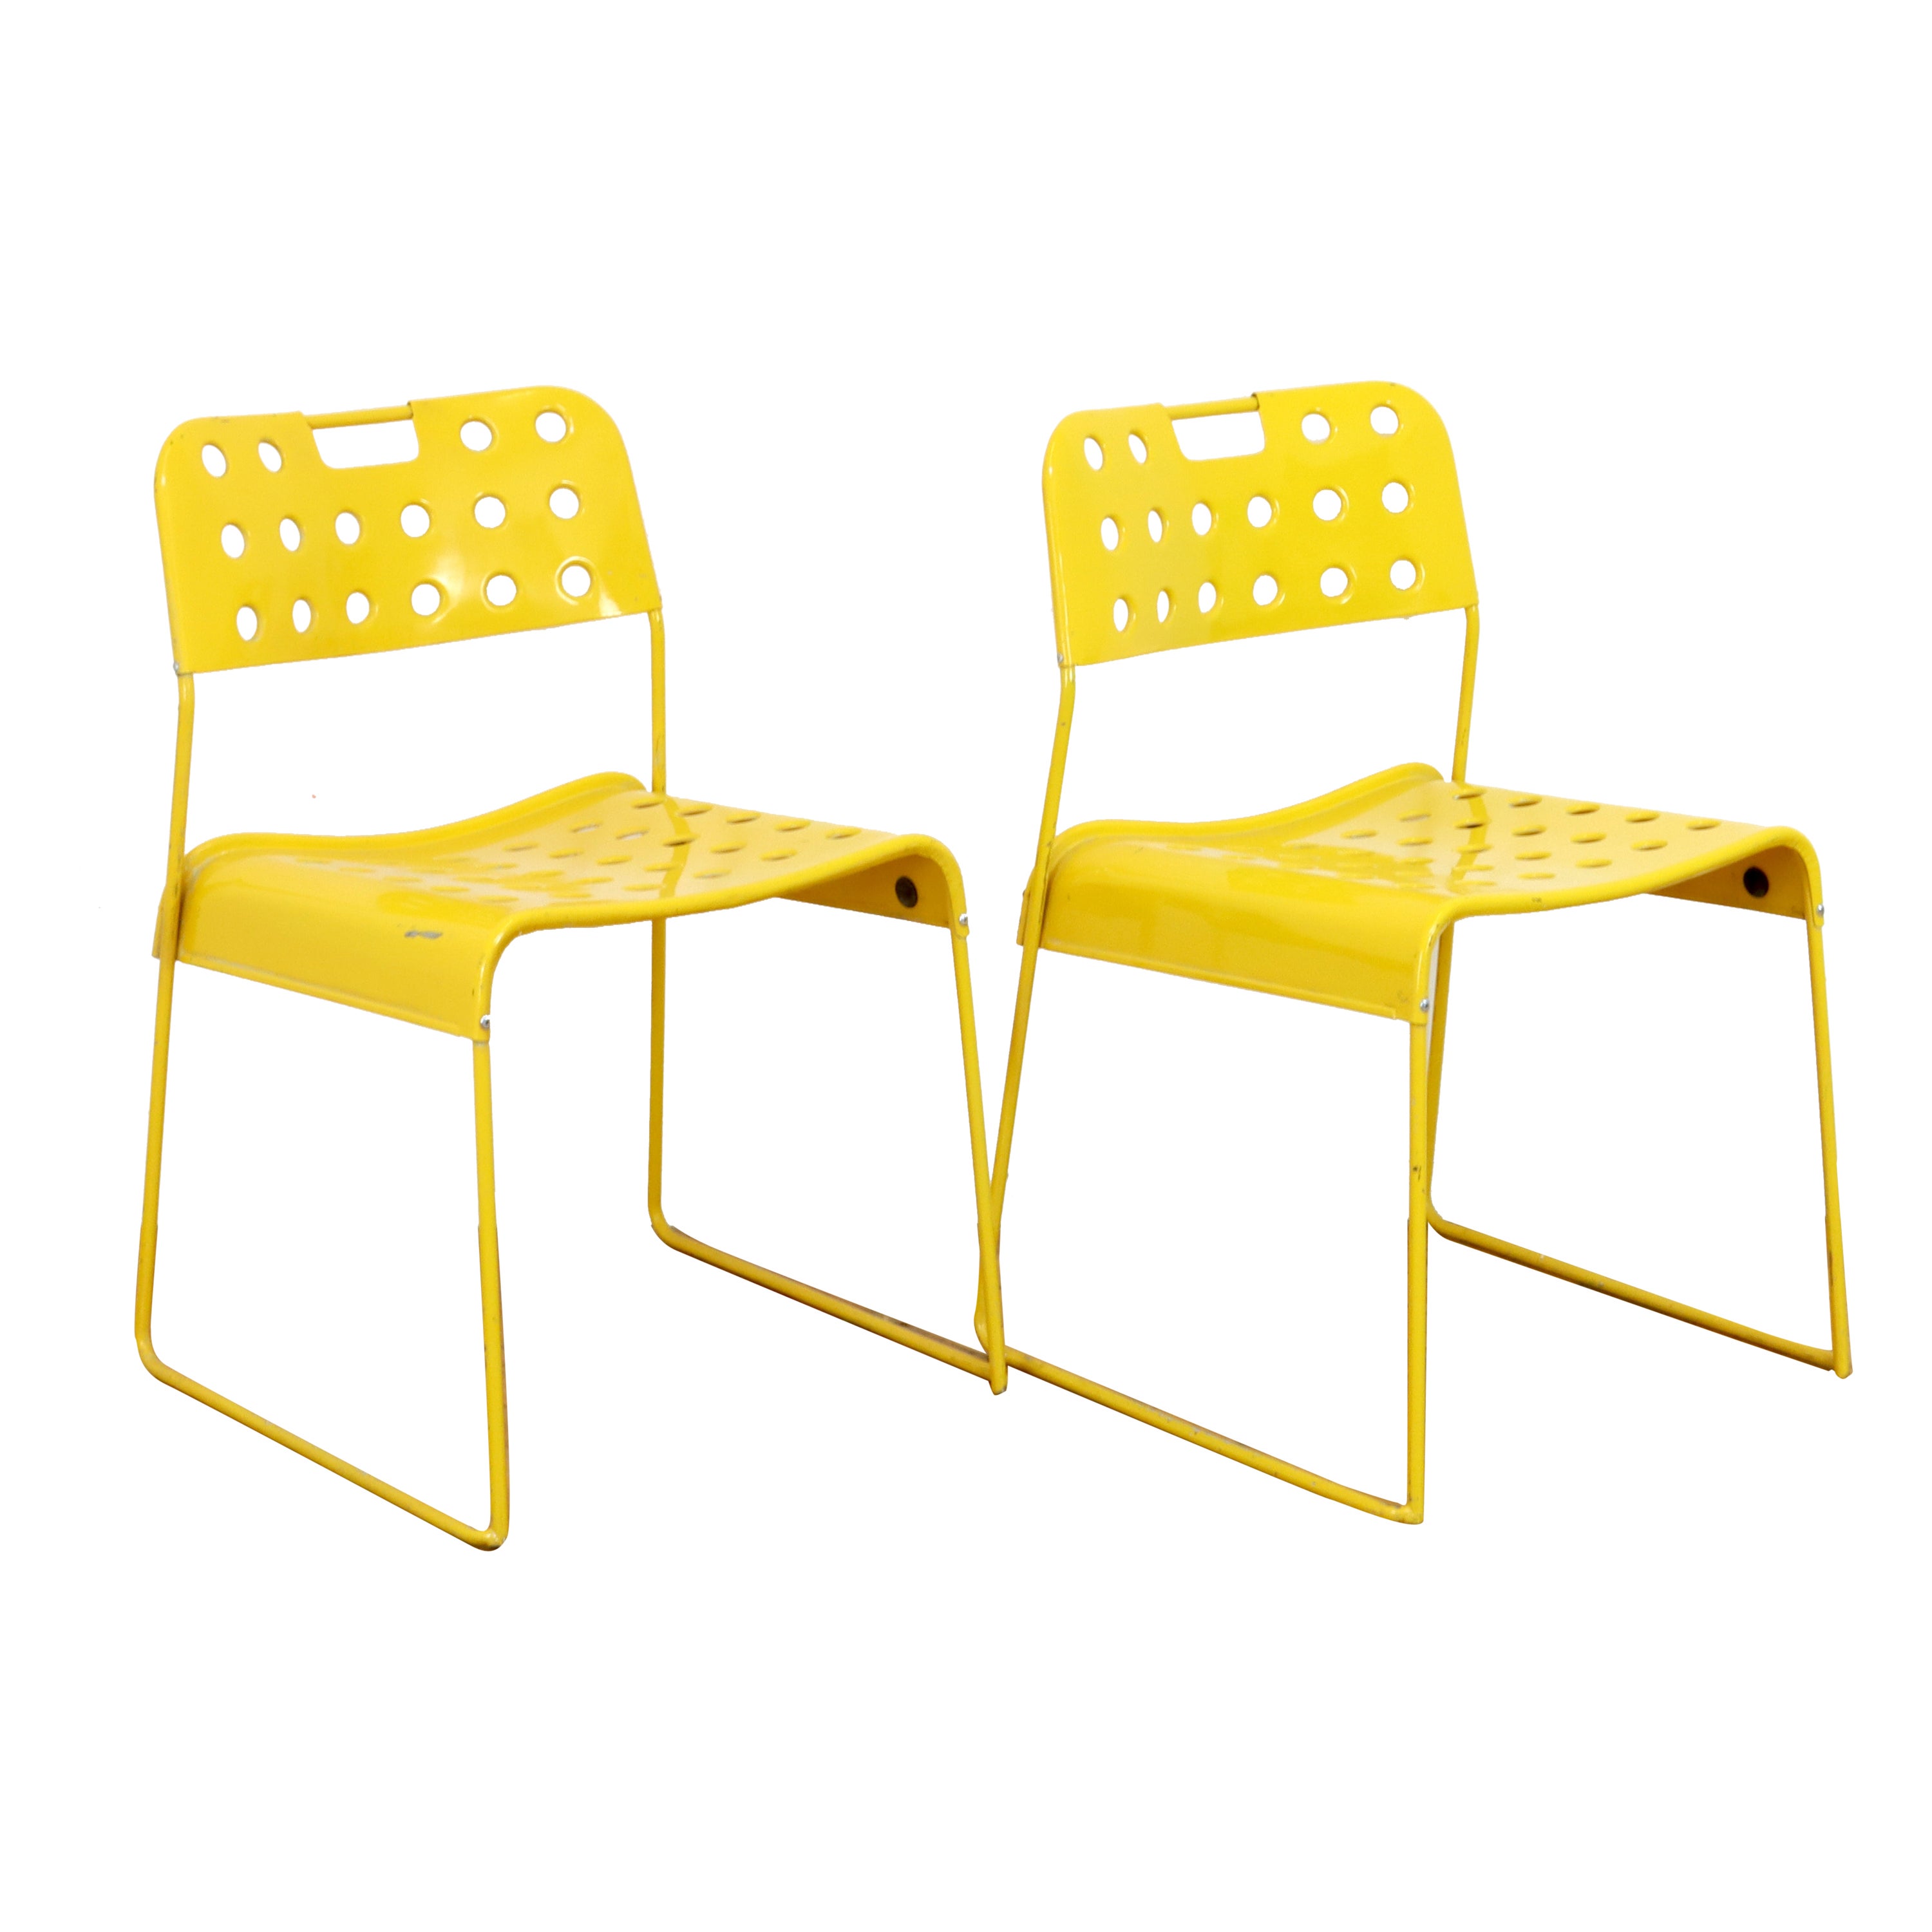 Pair of Vintage Yellow Omkstak Chairs  For Sale